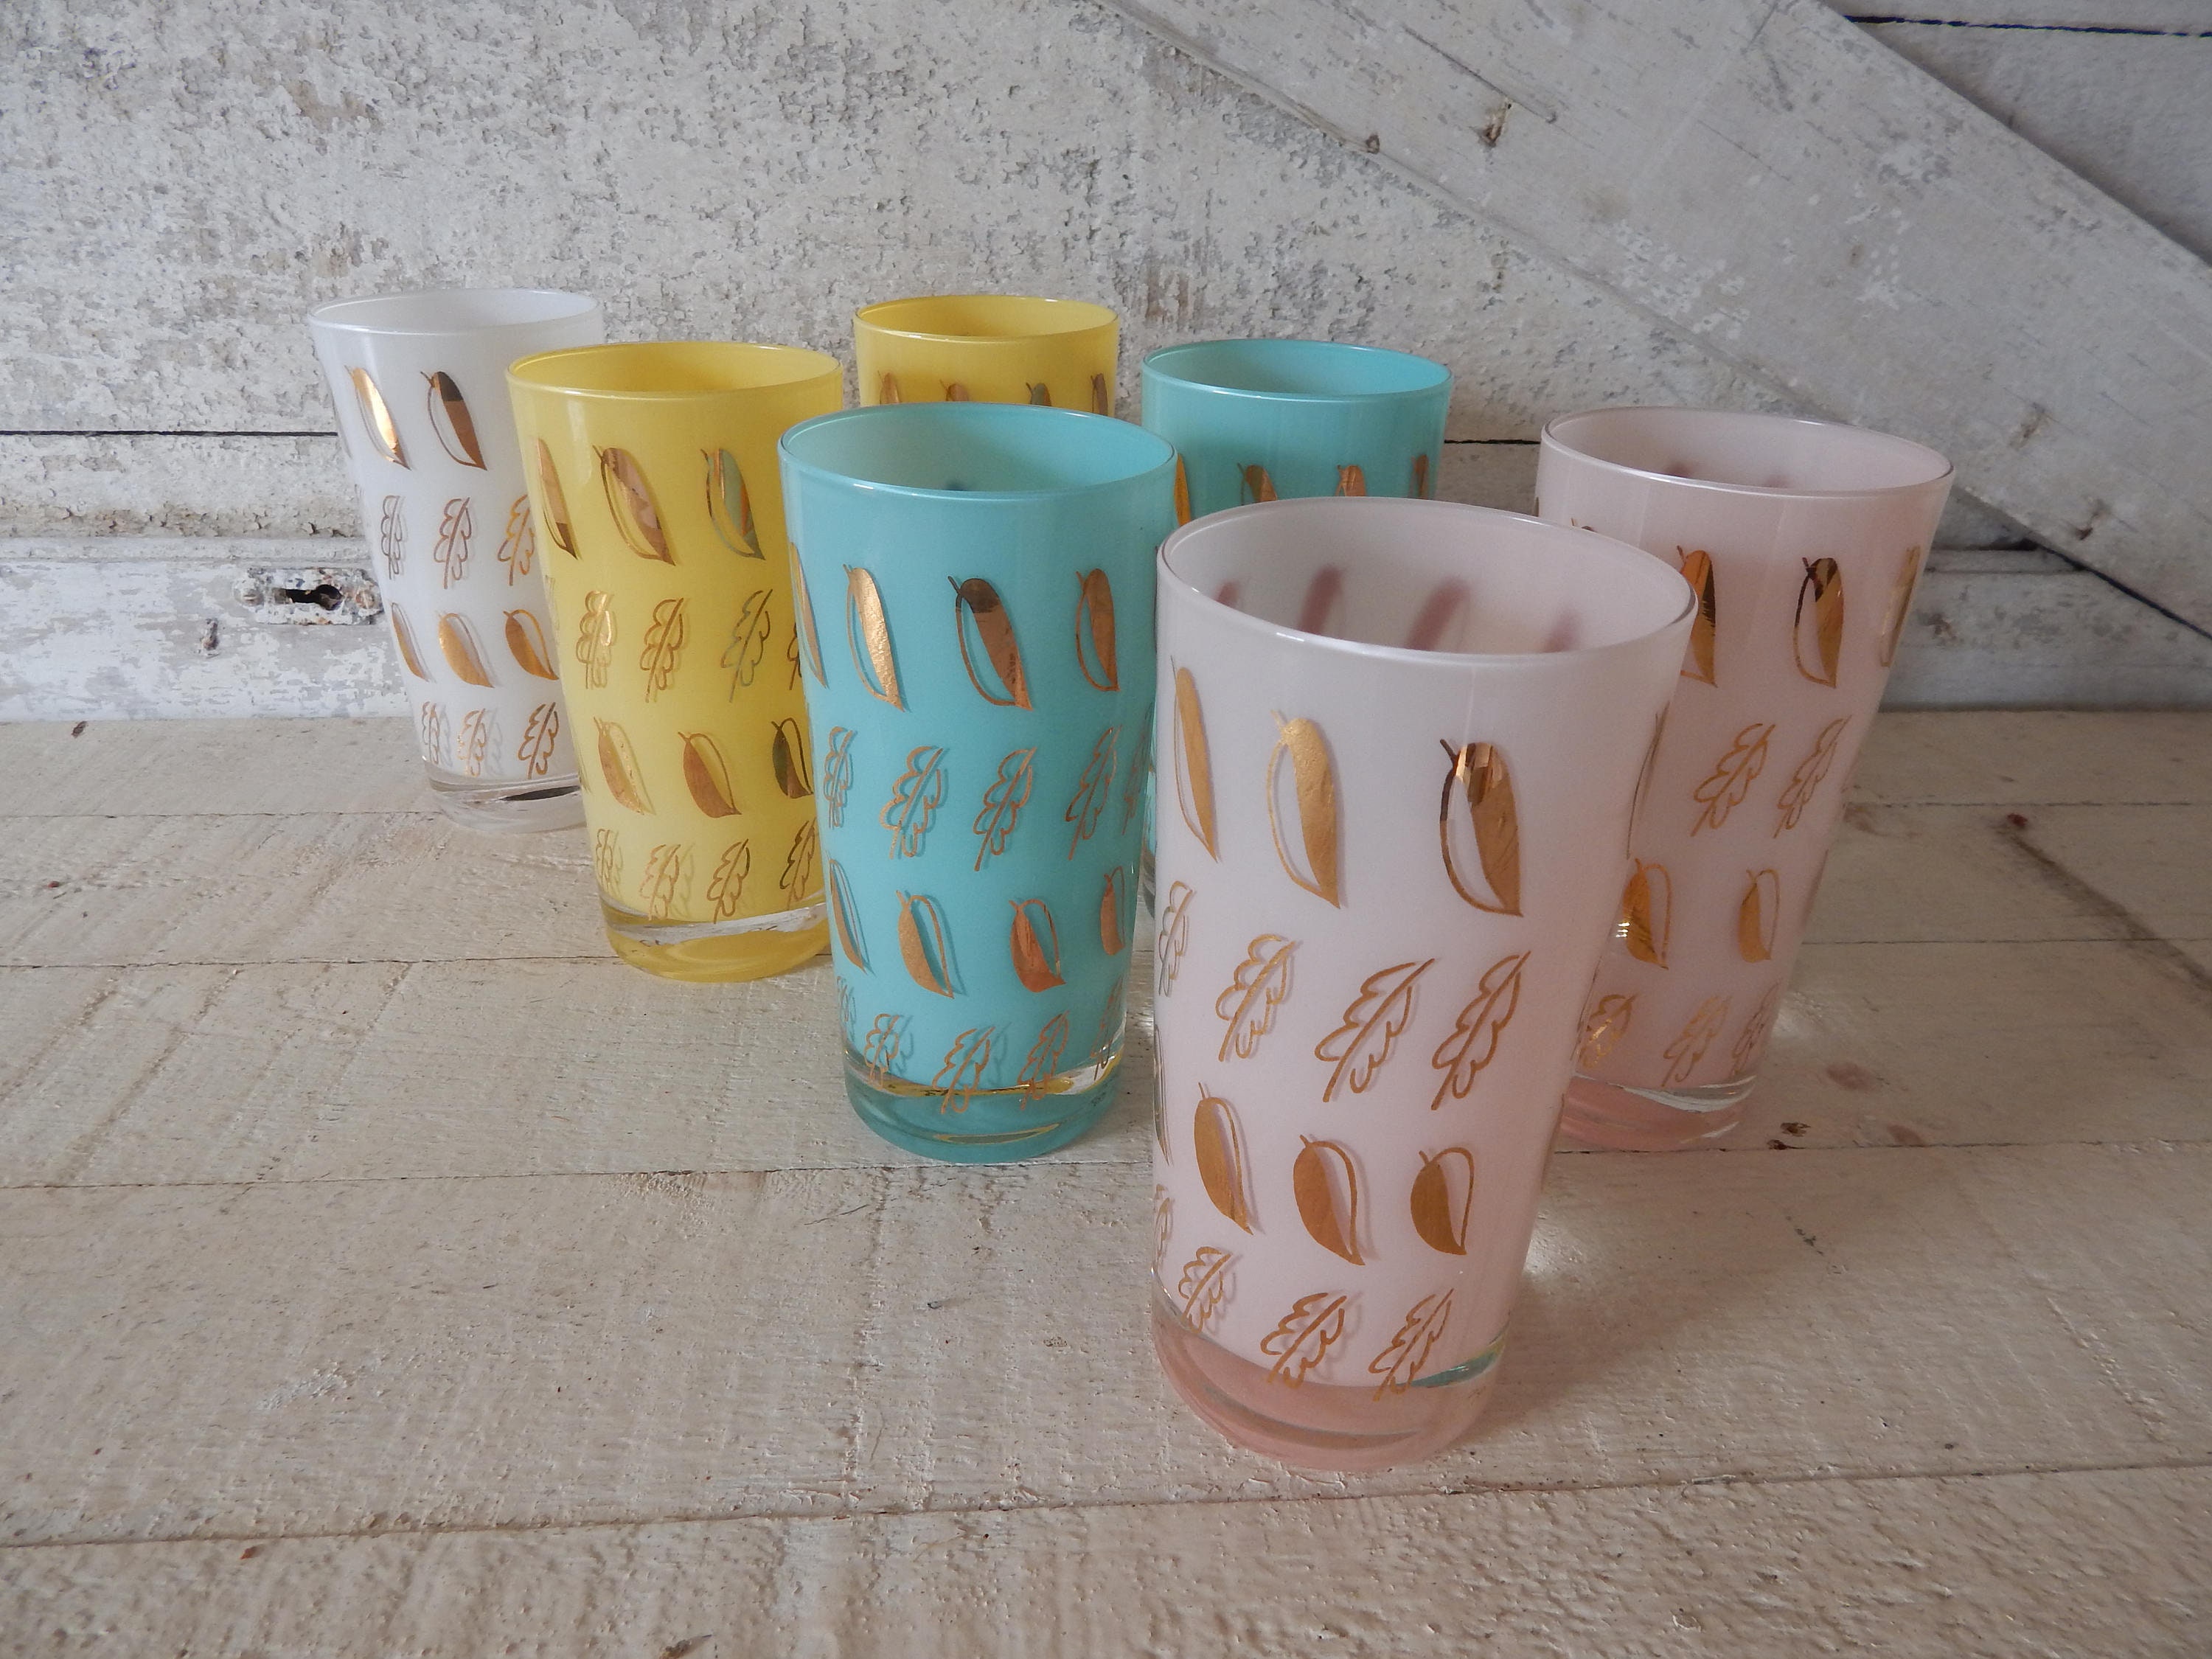 VINTAGE 1960s KITCHEN AID GLASSES CUPS TUMBLERS GLASS PINK WHITE BLUE LOT  OF 8